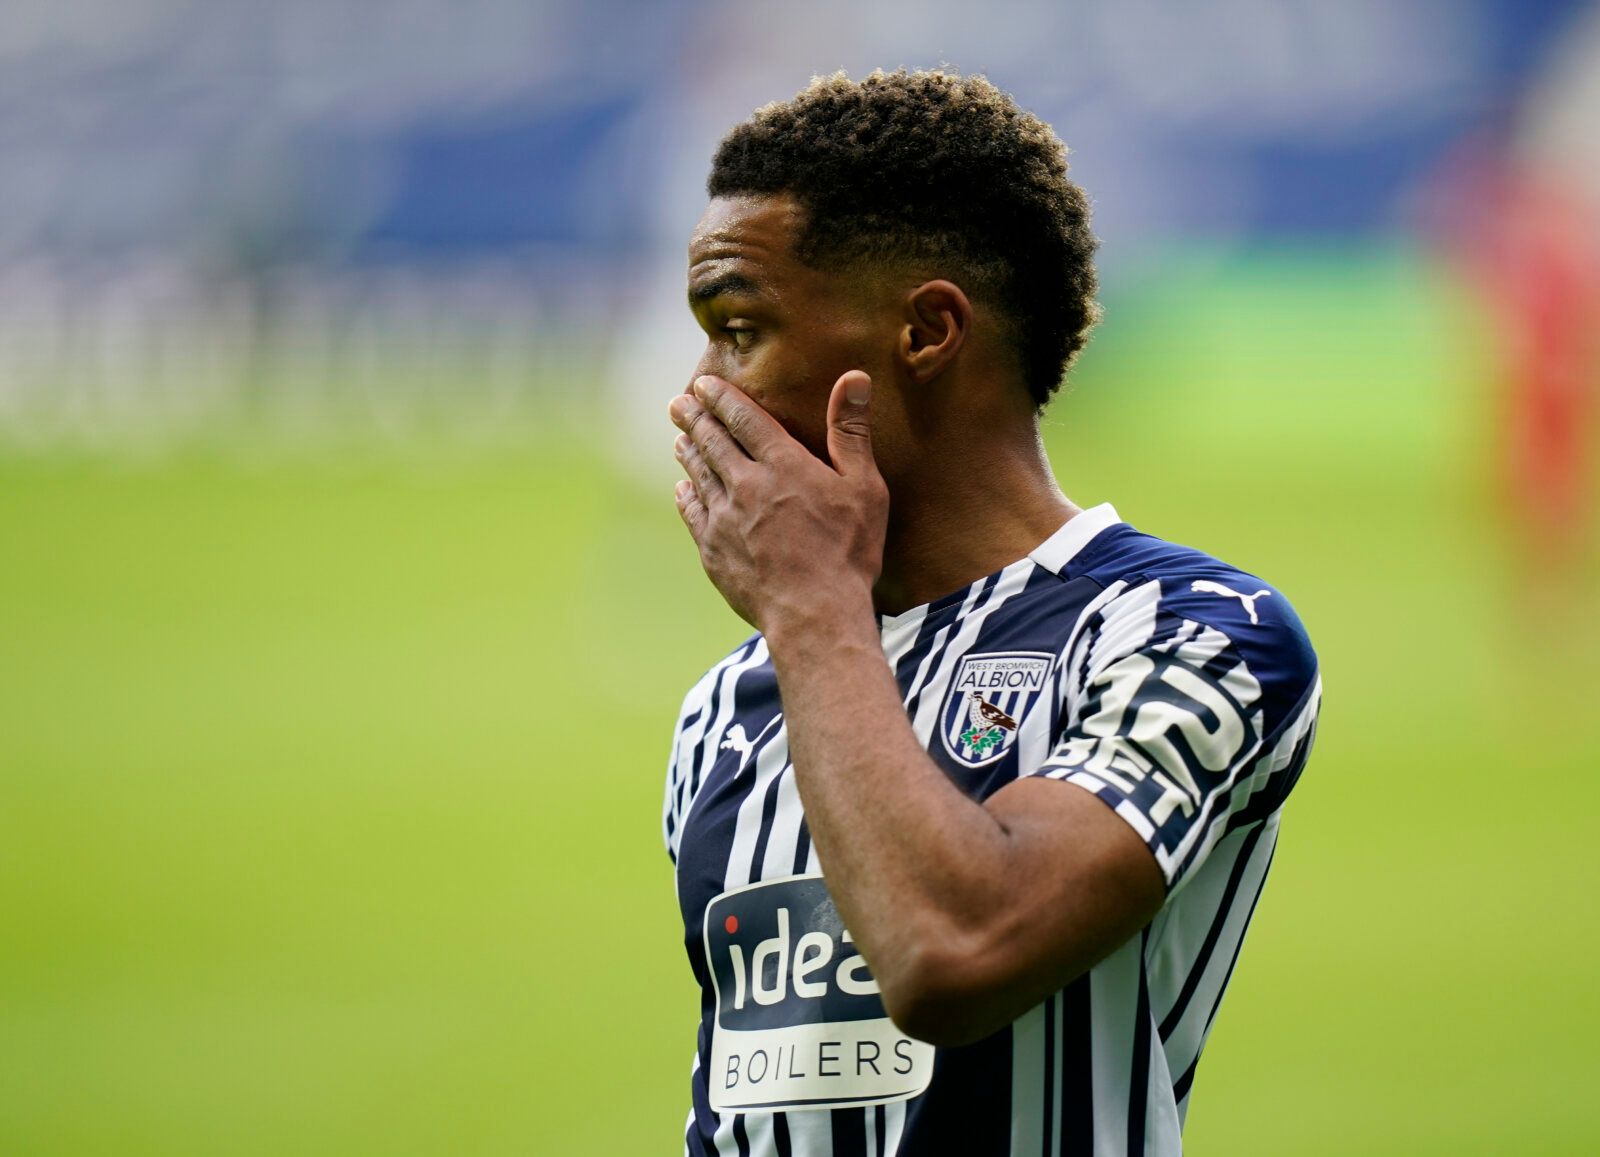 Soccer Football - Premier League - West Bromwich Albion v Liverpool - The Hawthorns, West Bromwich, Britain - May 16, 2021 West Bromwich Albion's Grady Diangana reacts Pool via REUTERS/Tim Keeton EDITORIAL USE ONLY. No use with unauthorized audio, video, data, fixture lists, club/league logos or 'live' services. Online in-match use limited to 75 images, no video emulation. No use in betting, games or single club /league/player publications.  Please contact your account representative for further